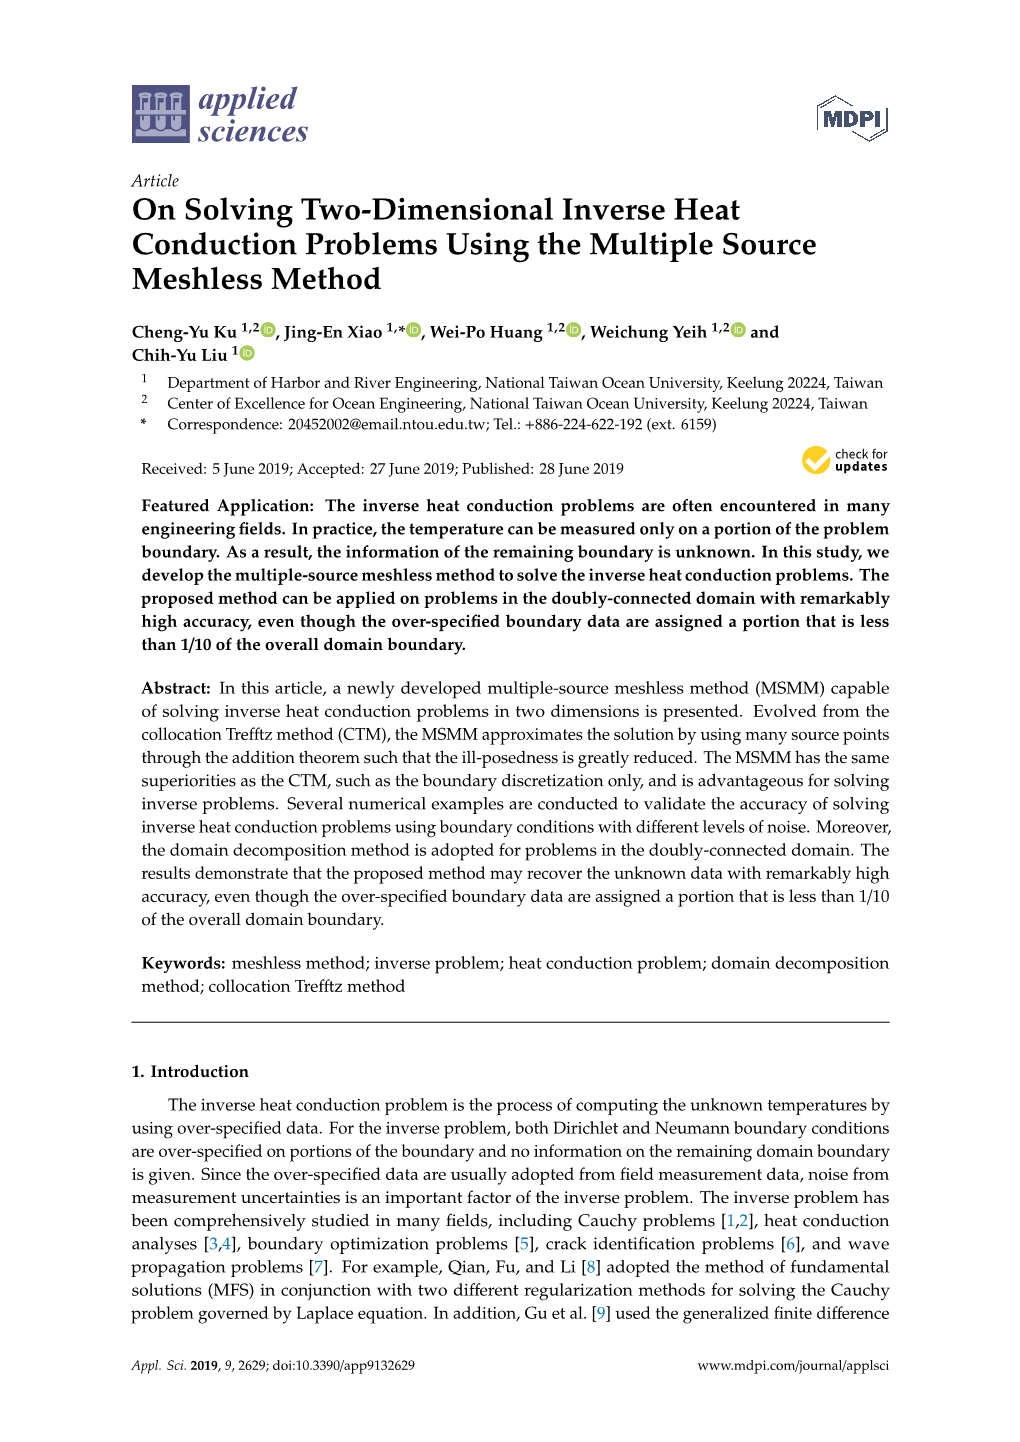 On Solving Two-Dimensional Inverse Heat Conduction Problems Using the Multiple Source Meshless Method